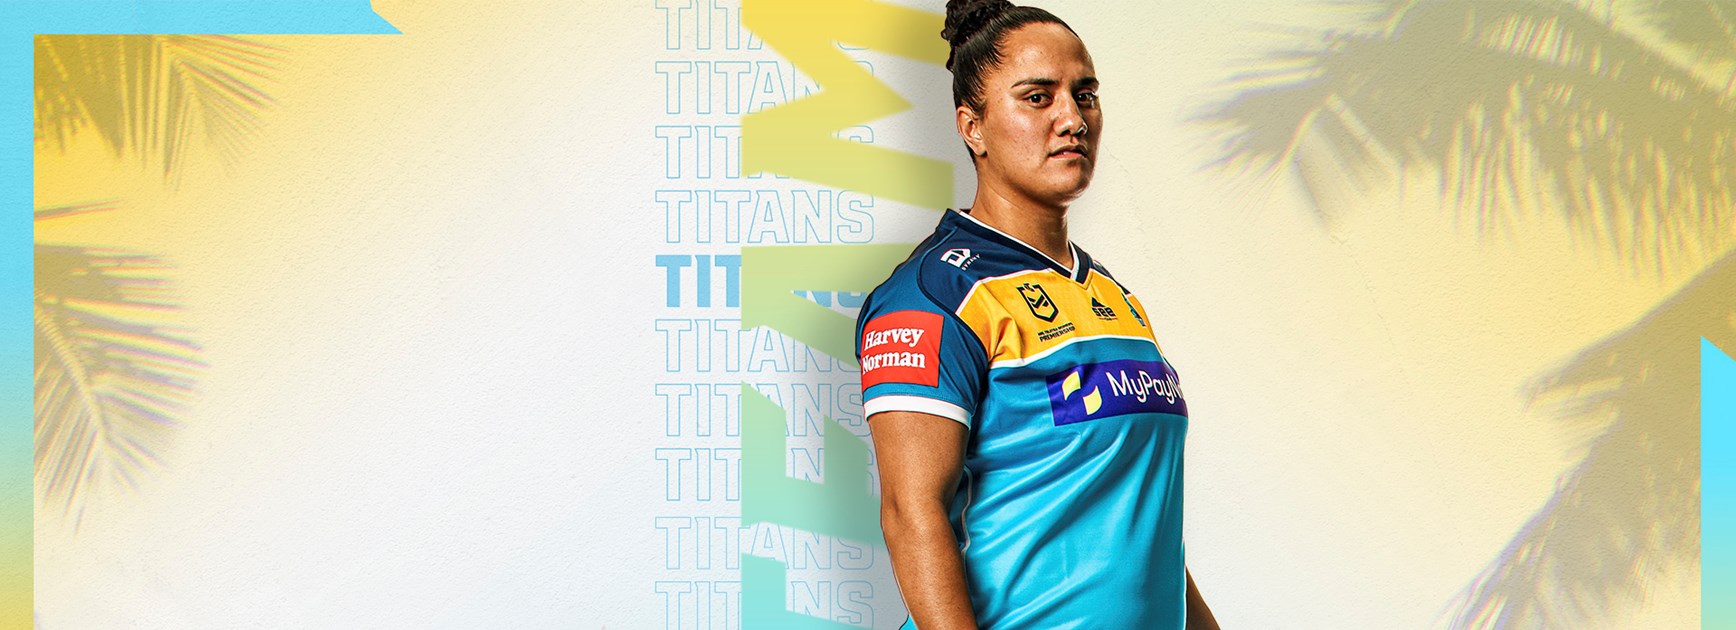 Teenager becomes a Titan as Maunsell named in NRLW side